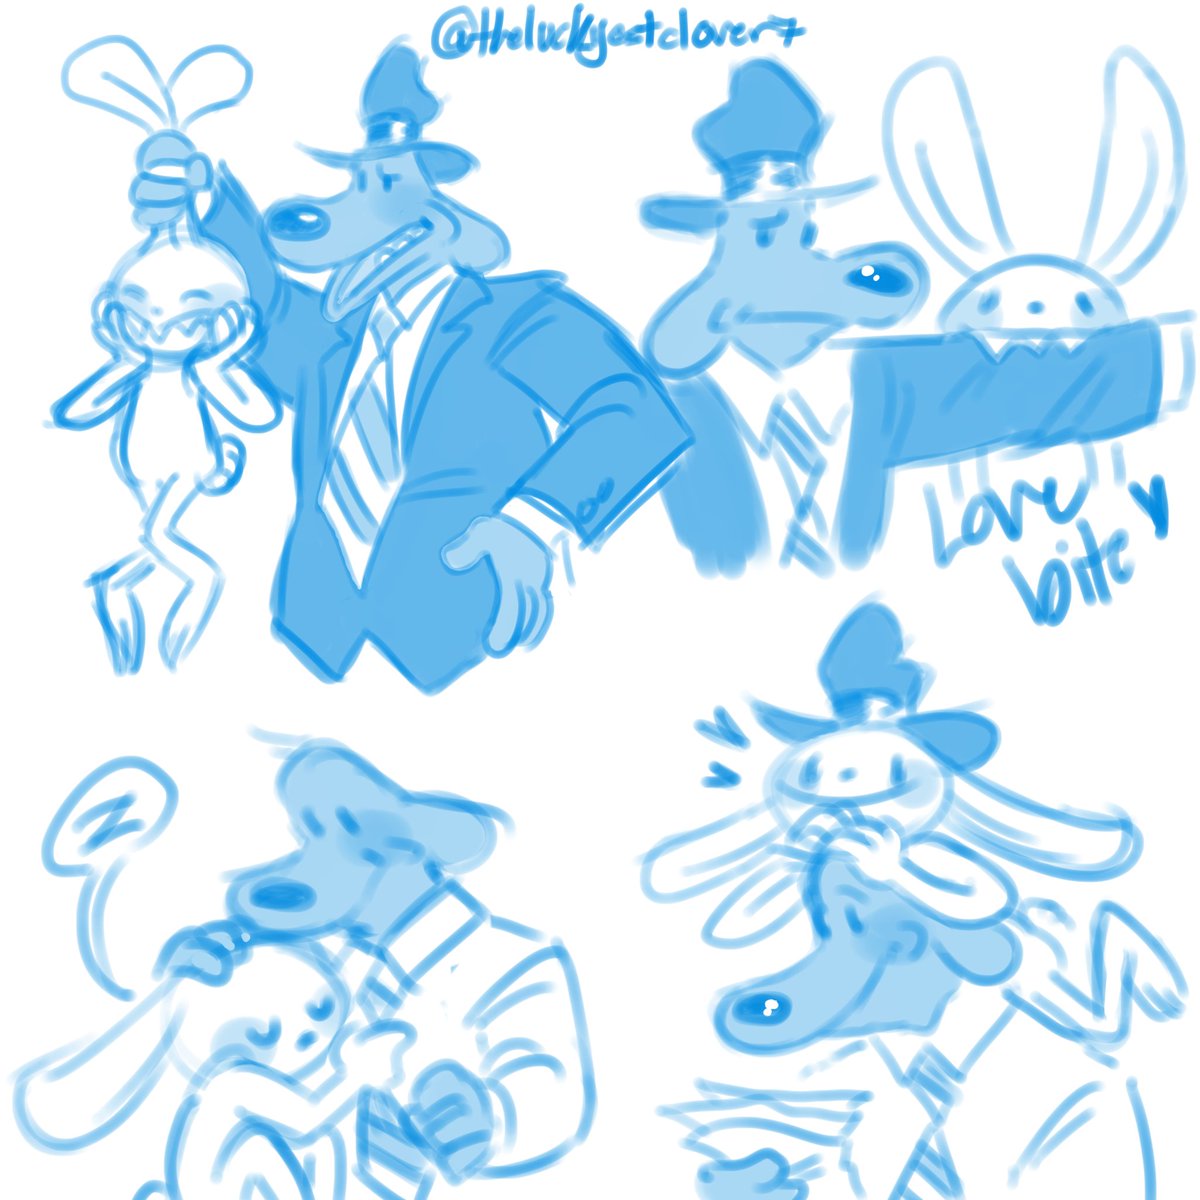 have i mentioned my love for sam and max? the fanfics for these two are ado...